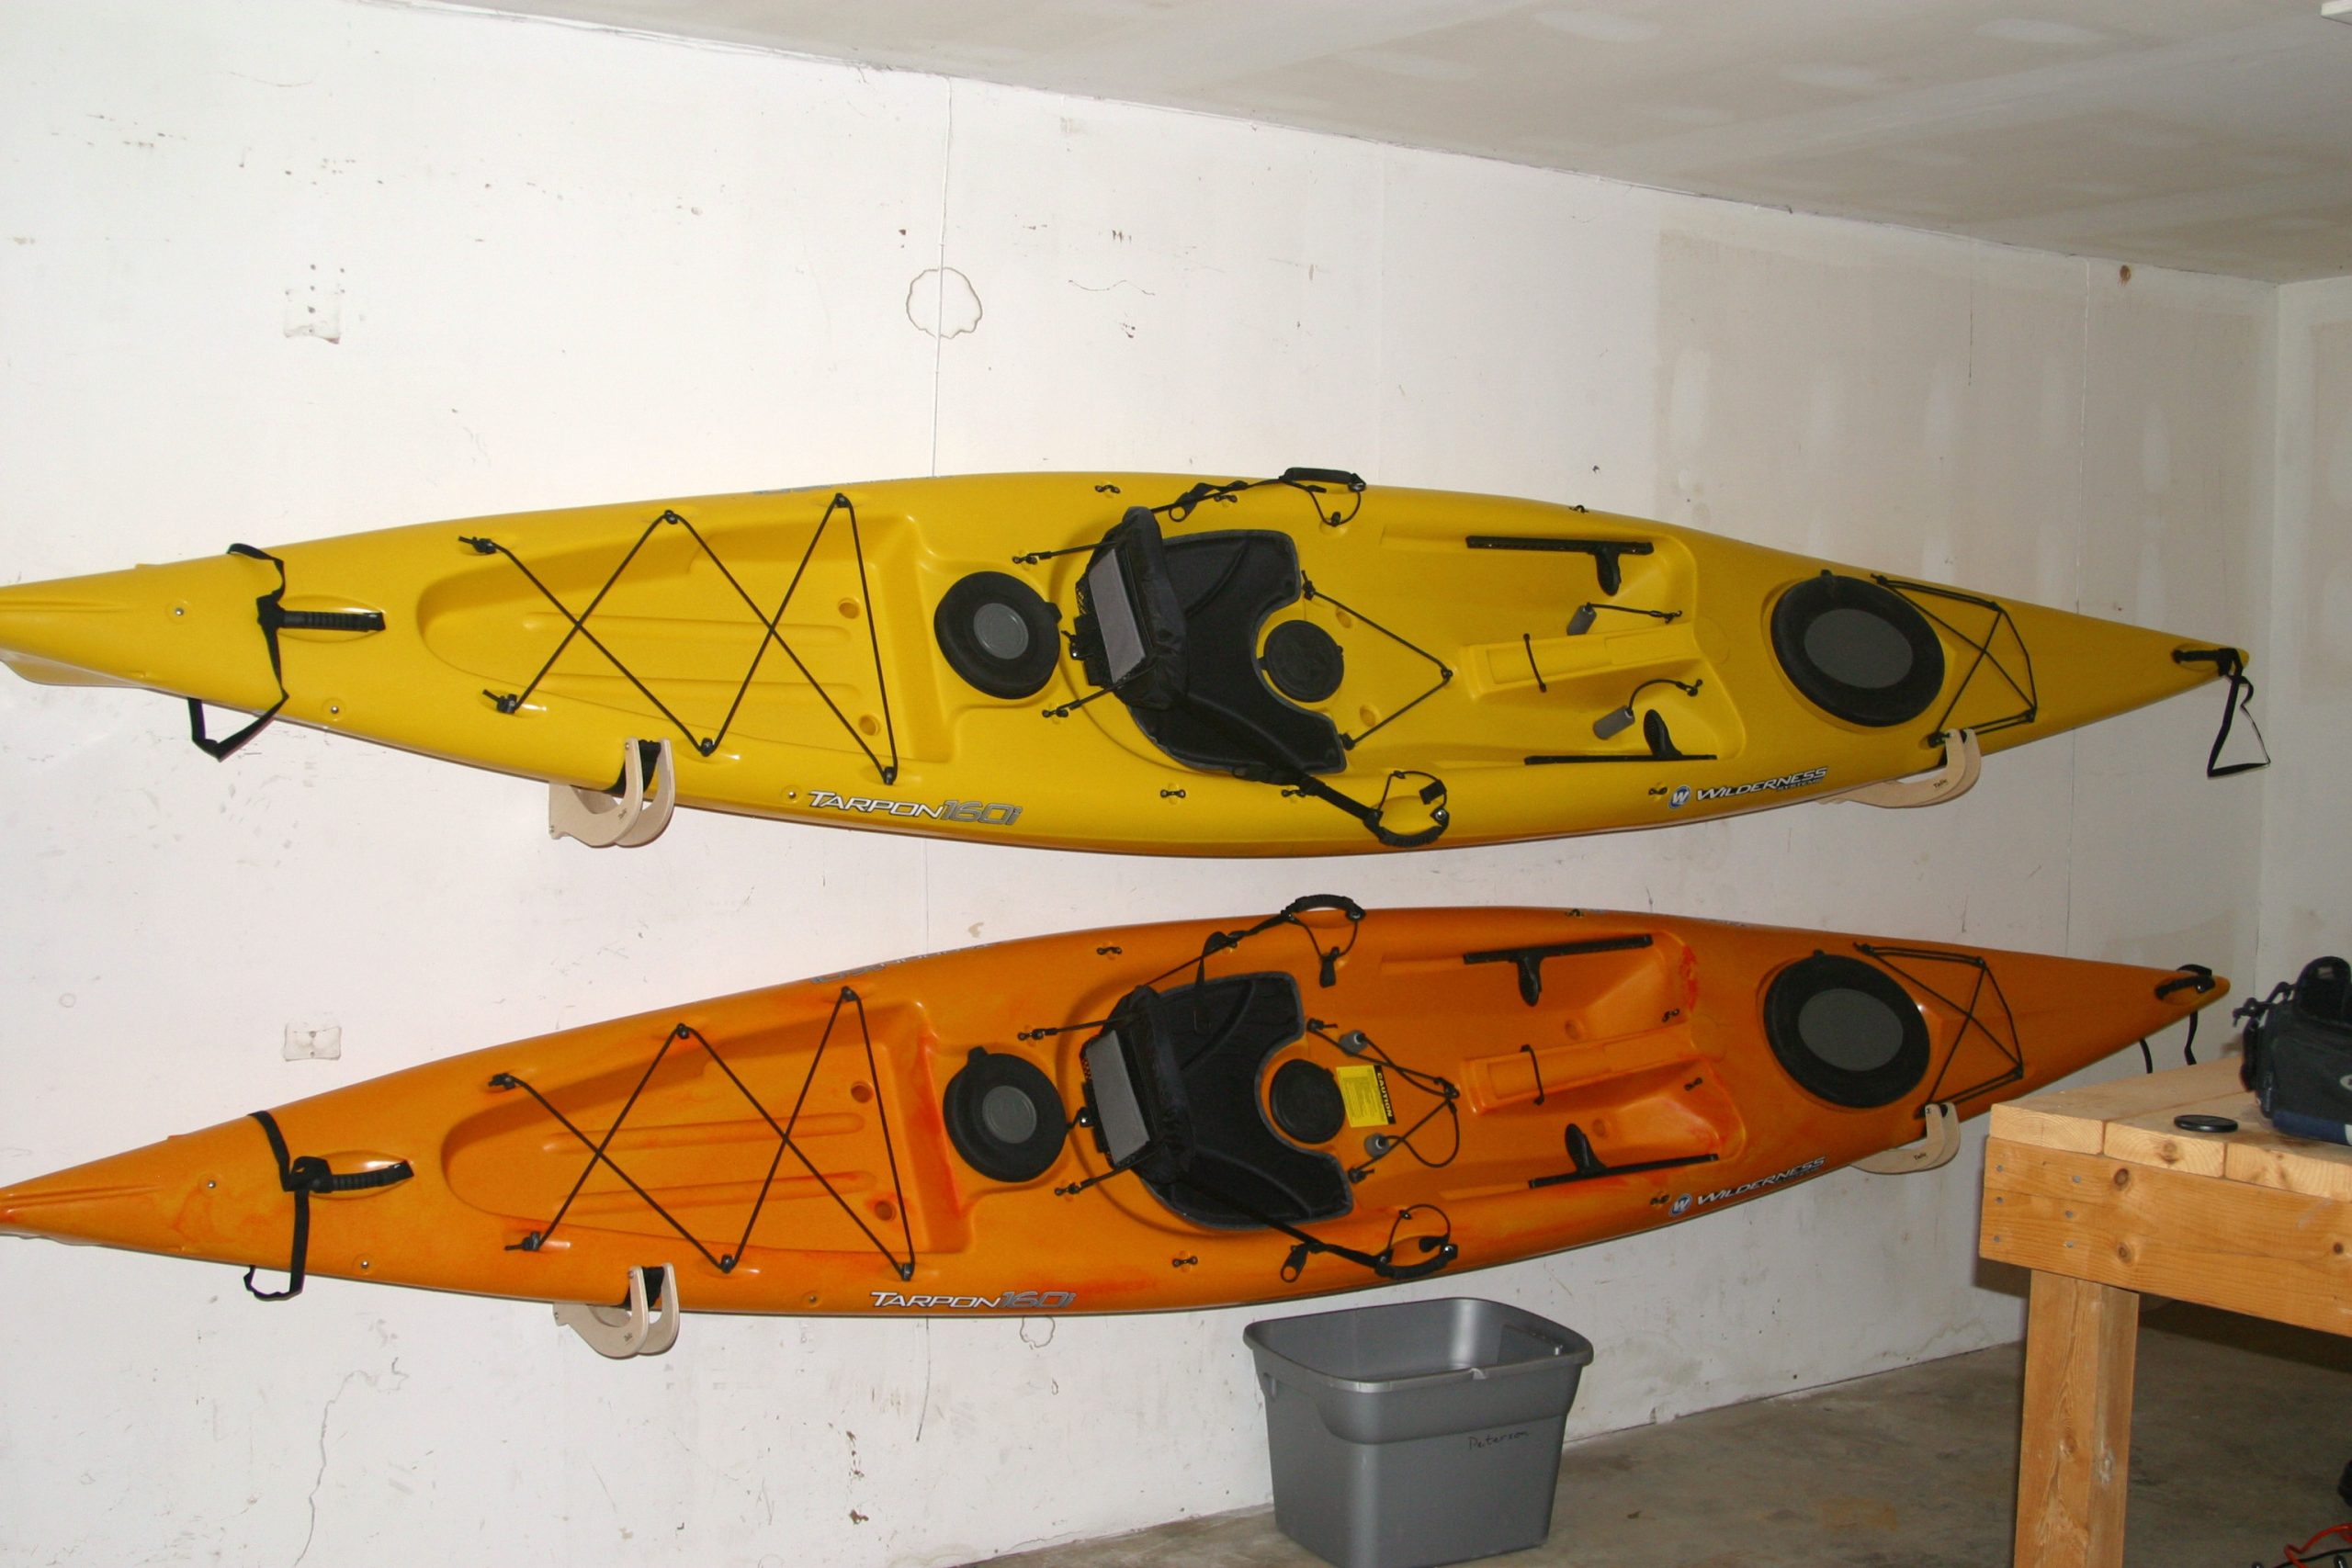 Wall-mounted hooks for hanging kayaks or canoes vertically